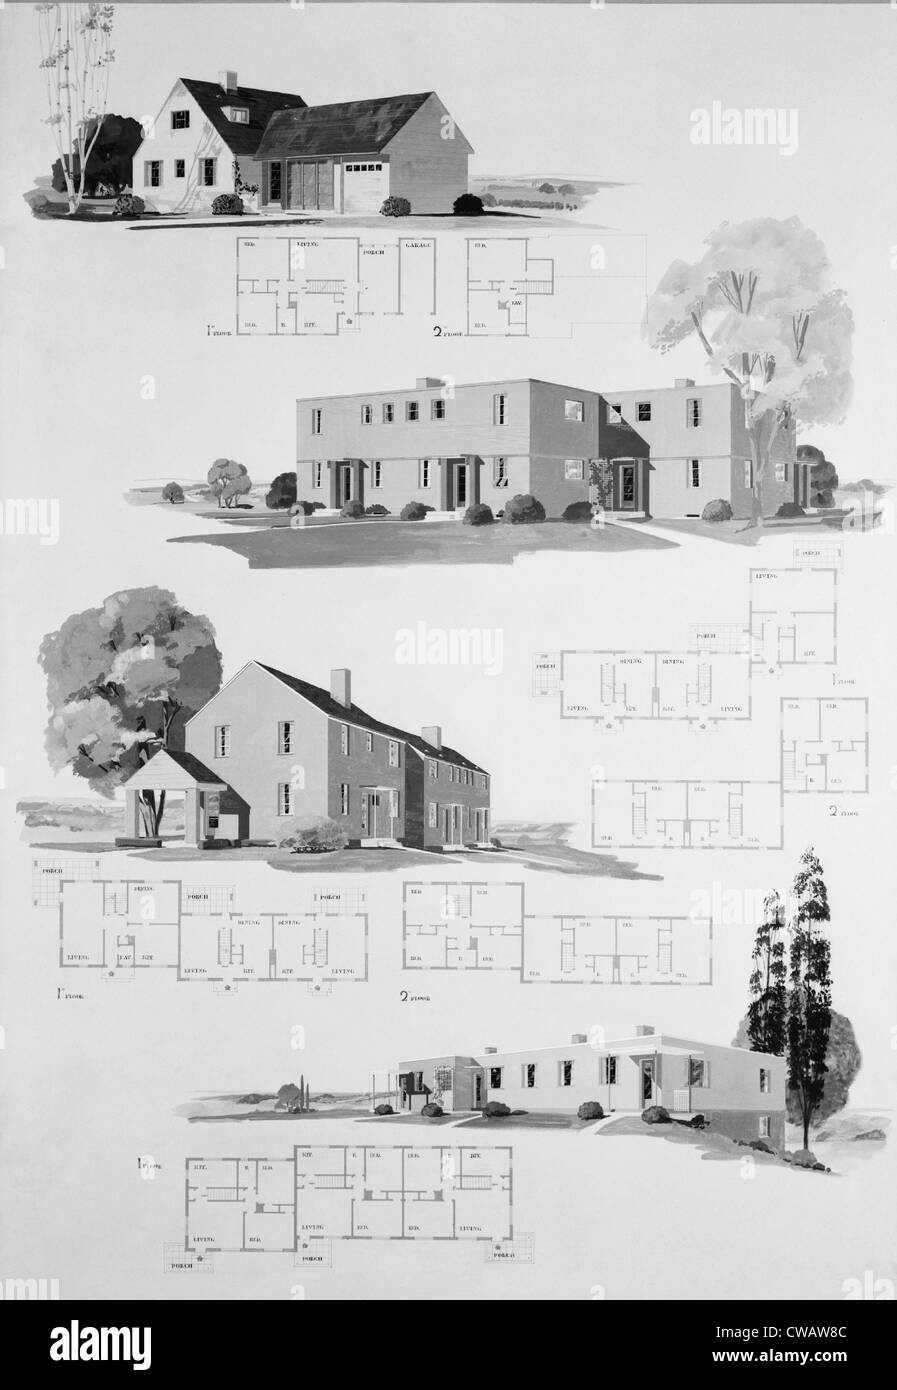 House plans for resettlement project built under the umbrella of the Federal Emergency Relief Act, of May 12, 1933. Greenhills, Stock Photo